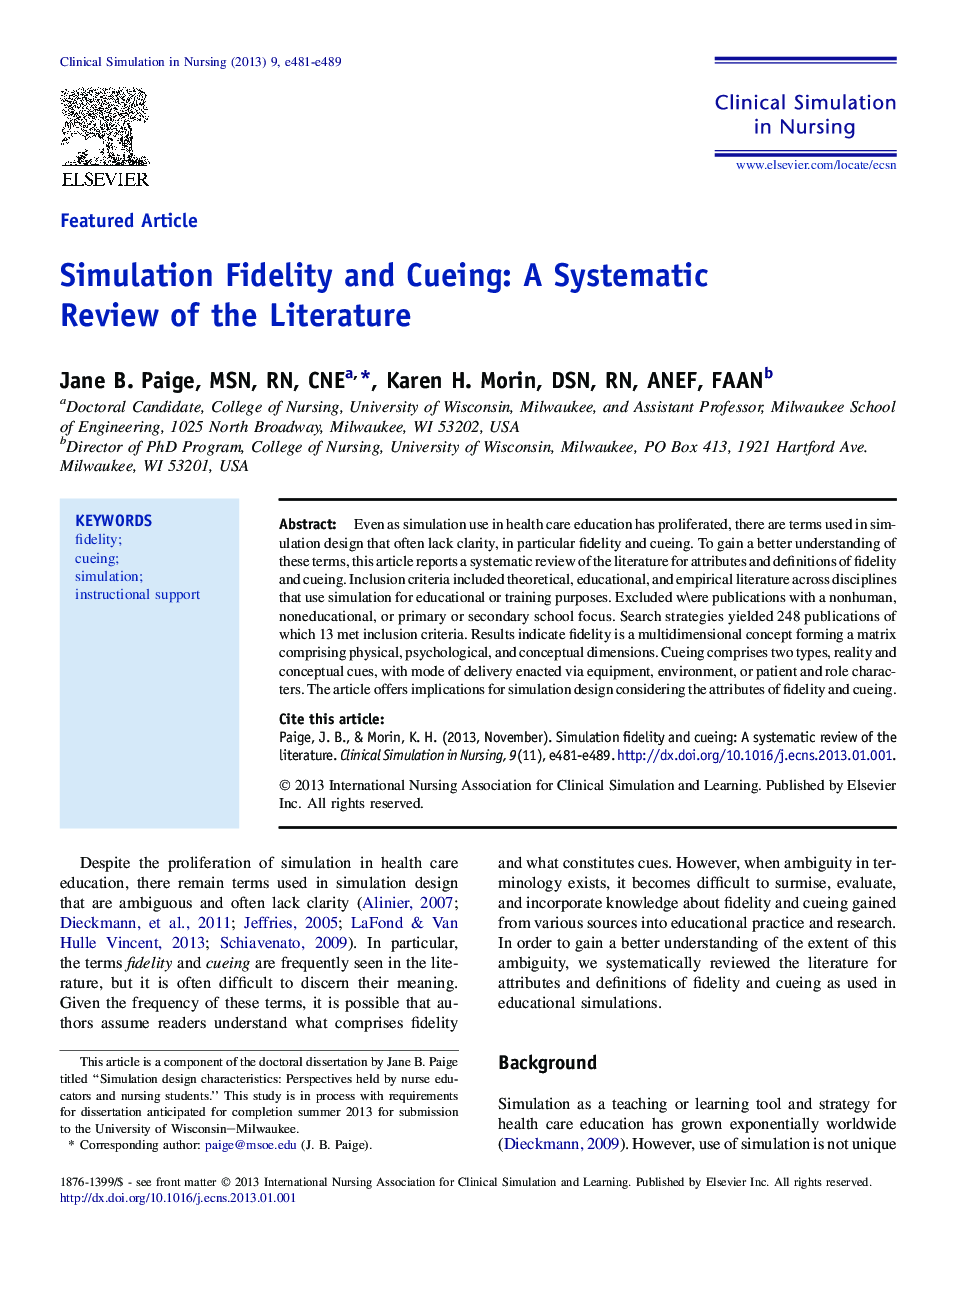 Simulation Fidelity and Cueing: A Systematic Review of the Literature 